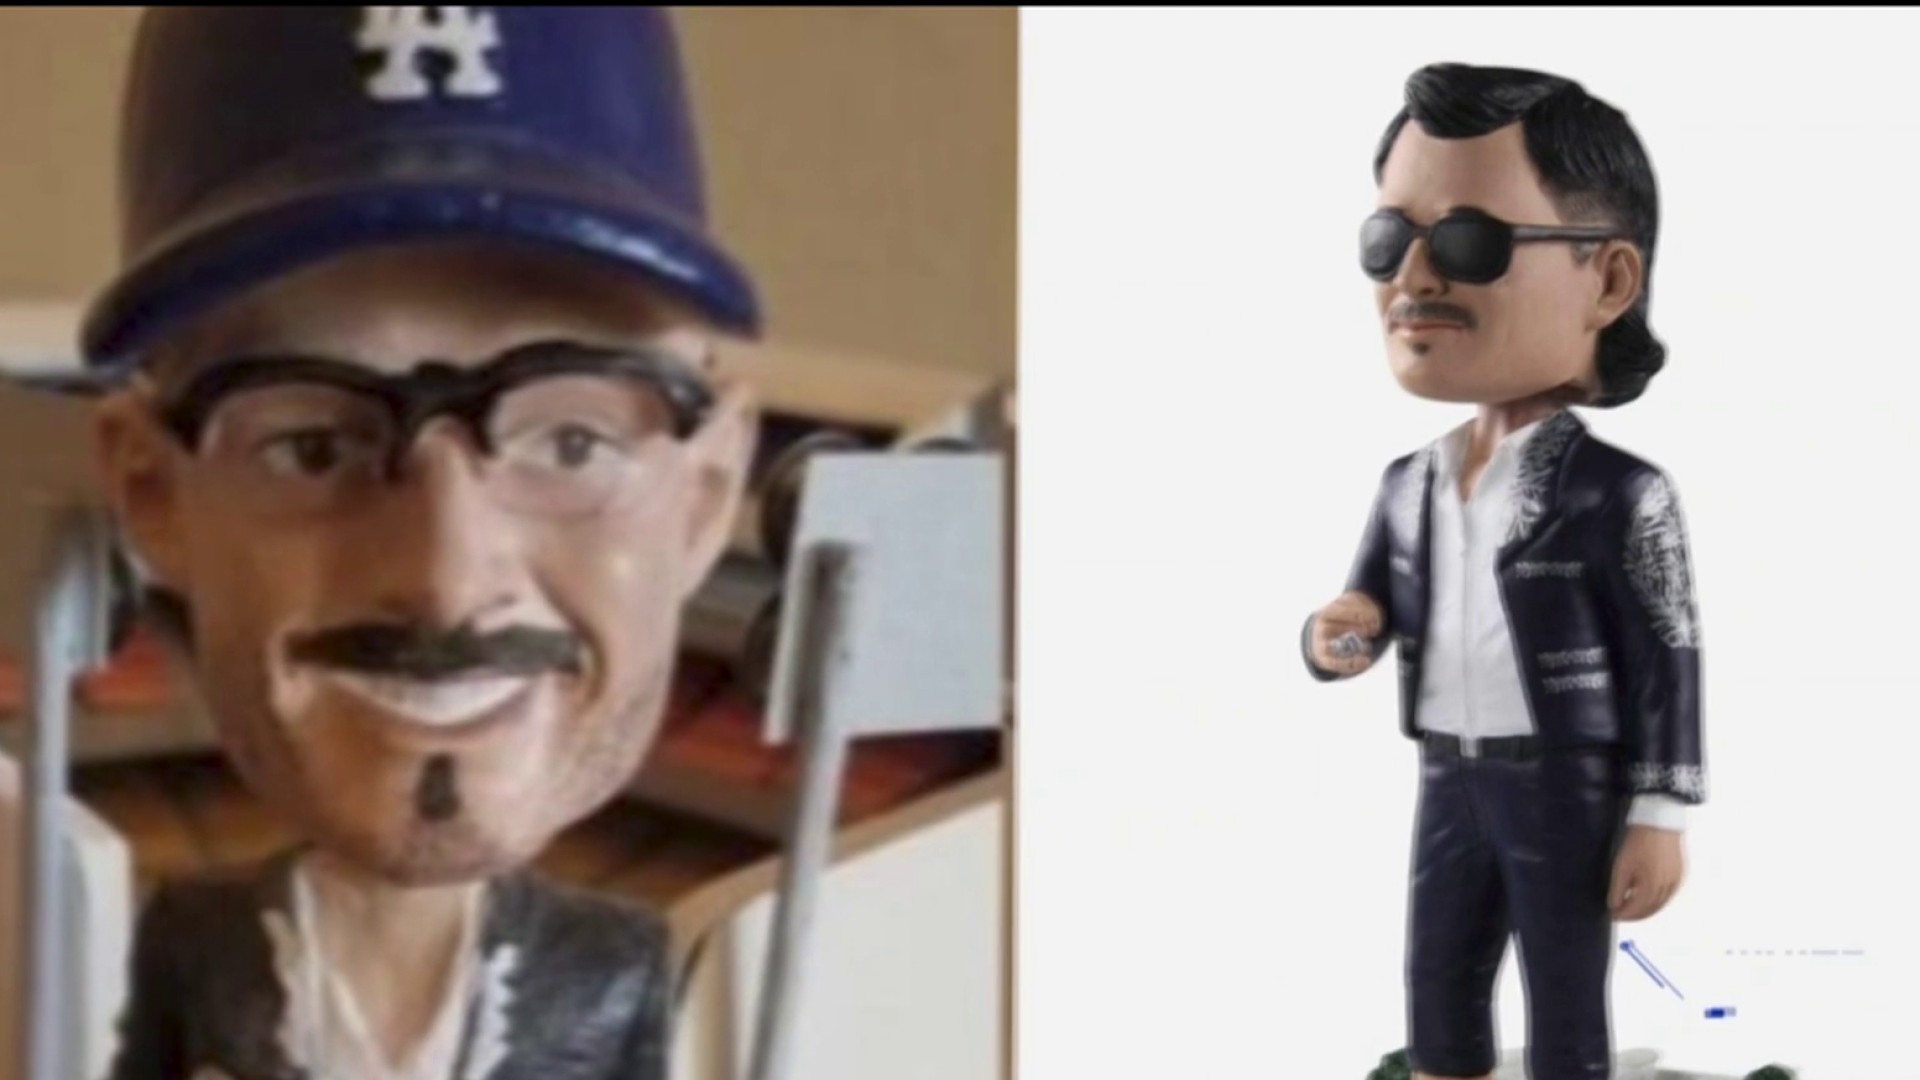 2023 Dodgers Promotions Schedule & Giveaways Dates: Mariachi Joe Kelly  Bobblehead